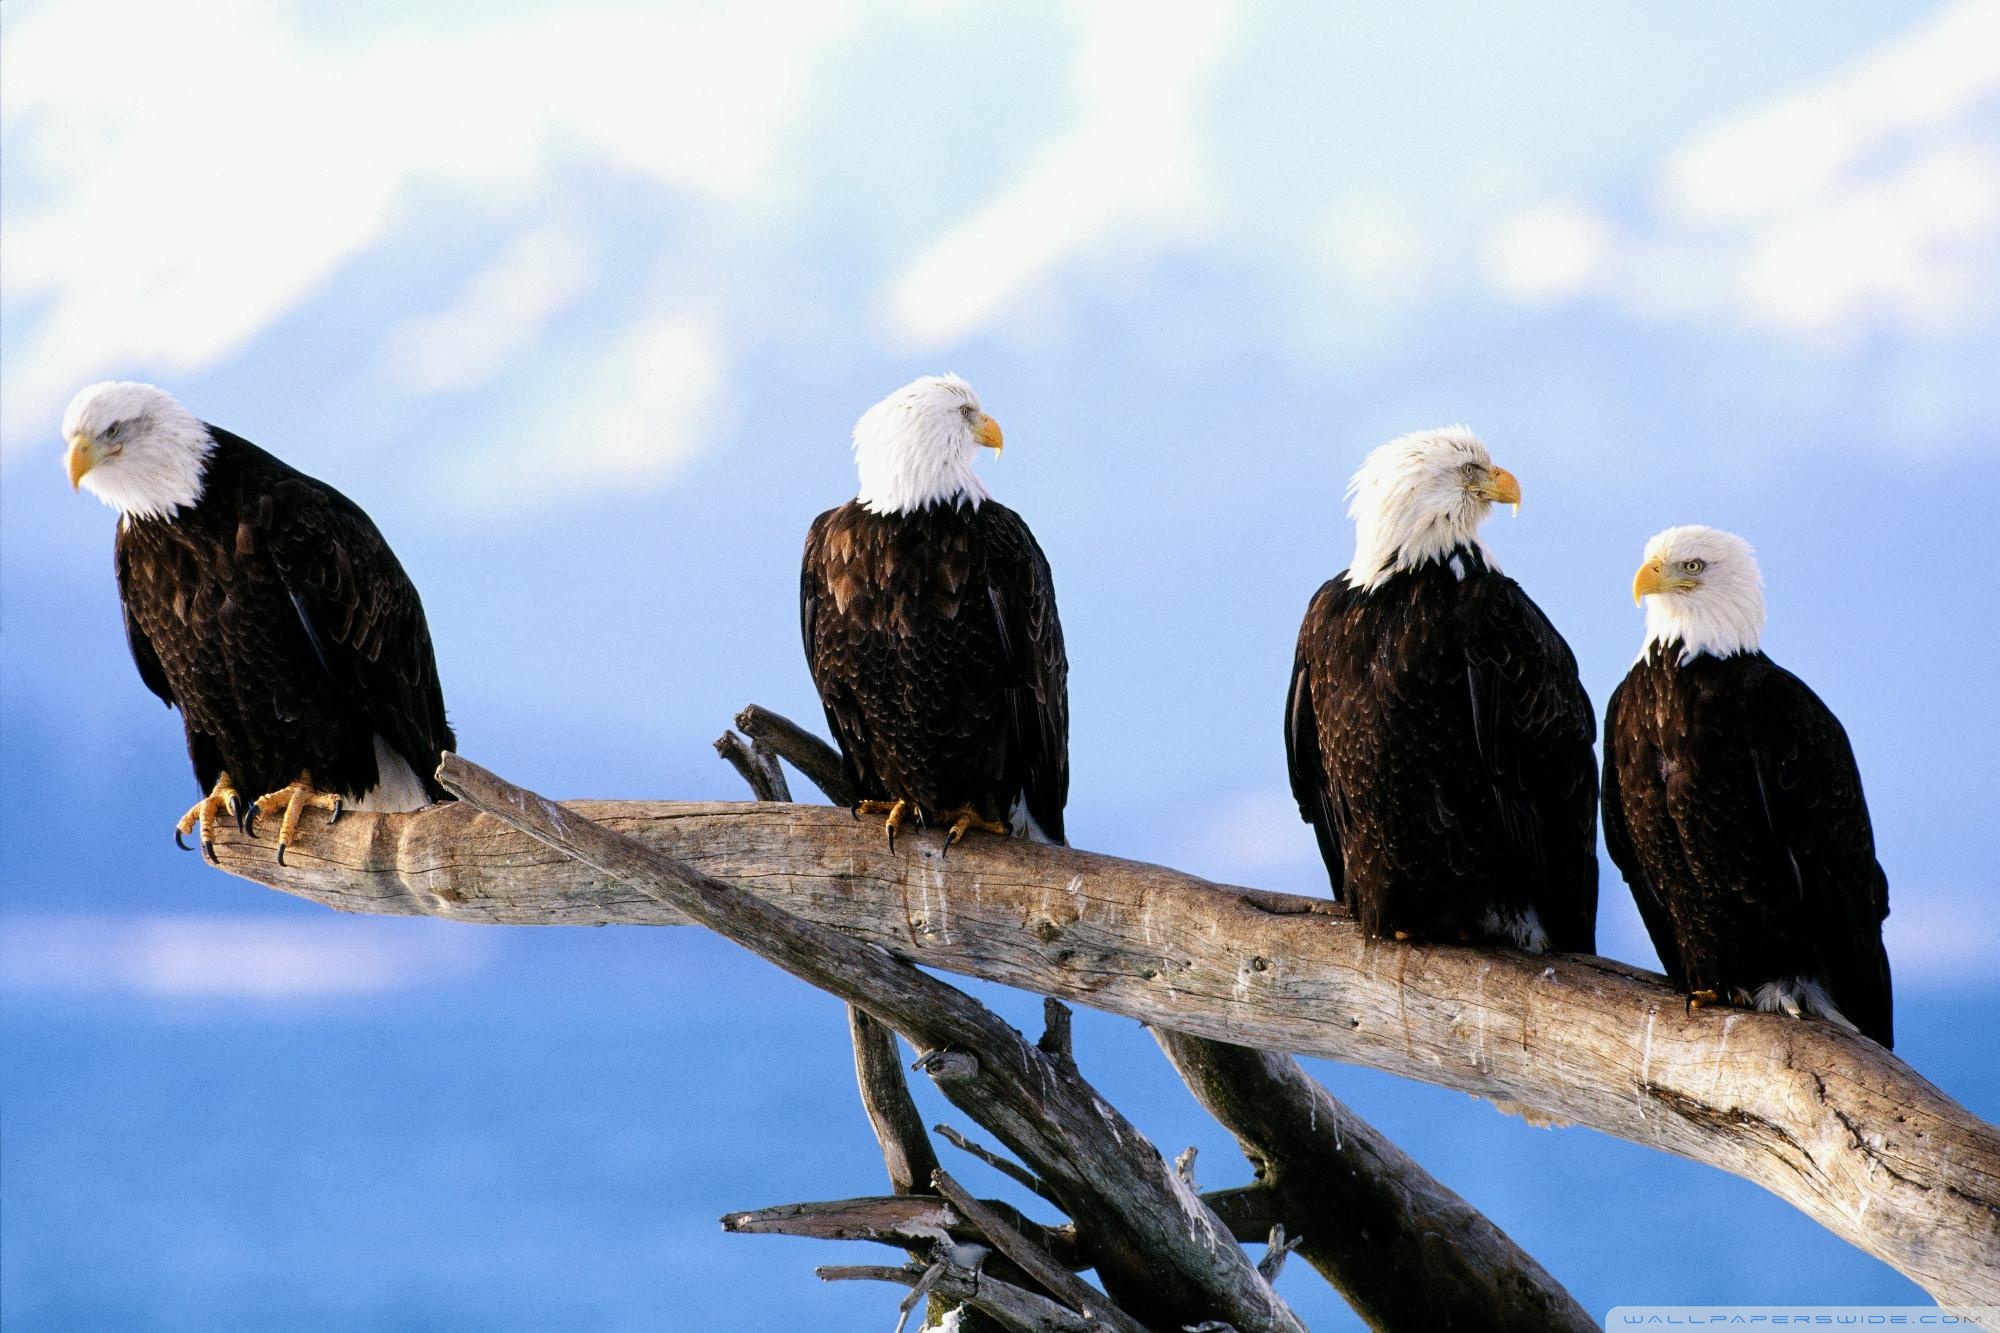 Eagle Hd Wallpapers 1080p For Mobile